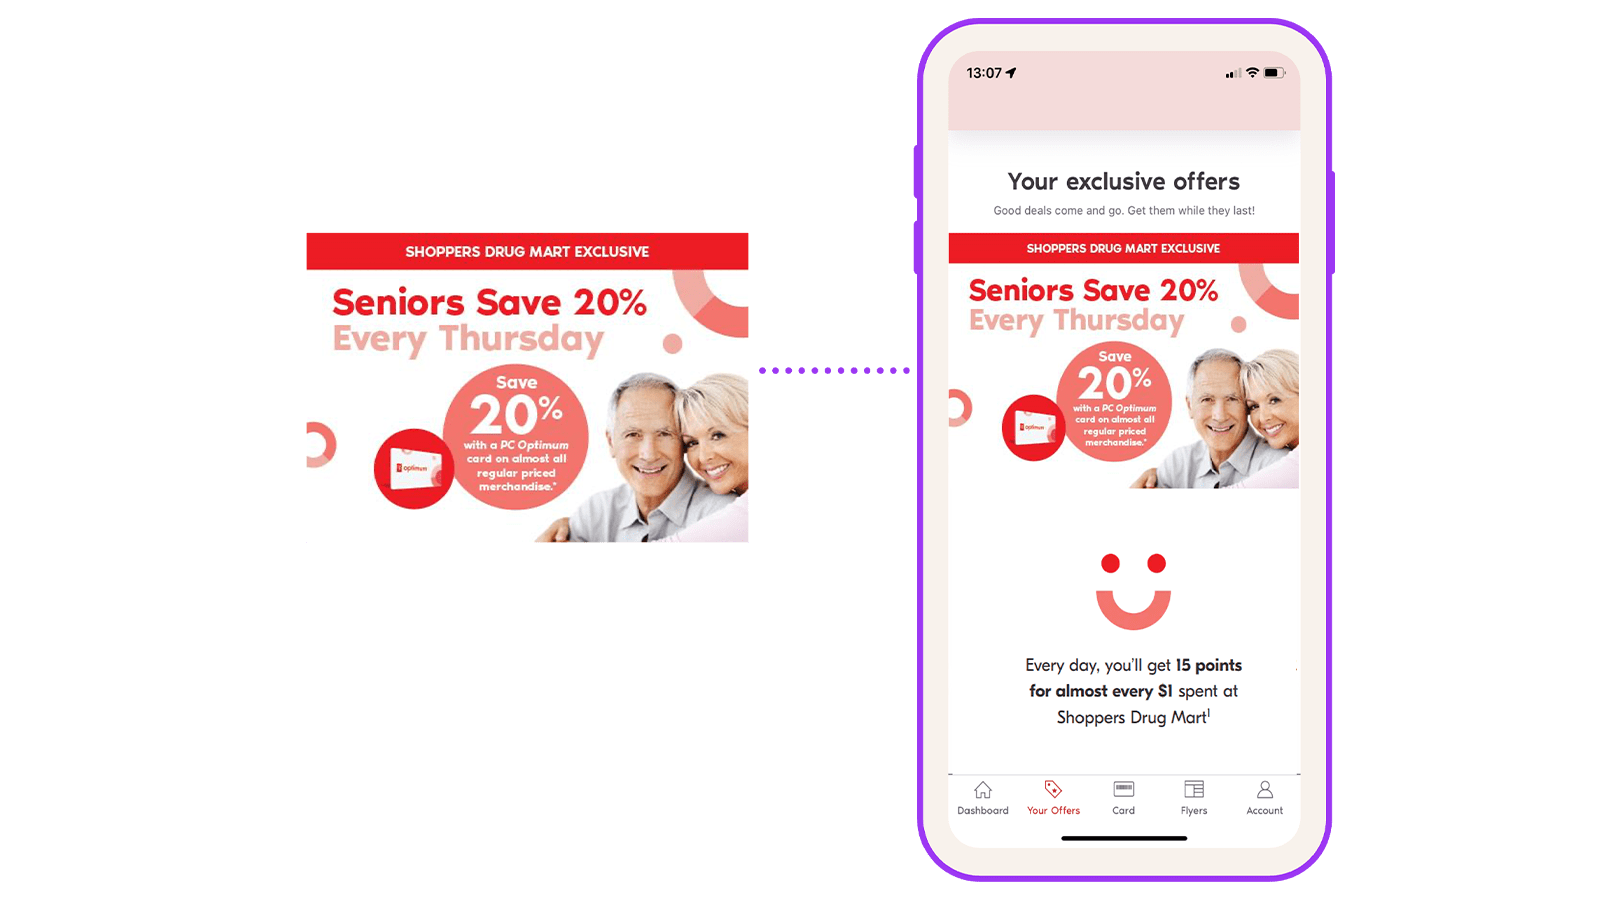 Shoppers Drug Mart - Segmented offers example